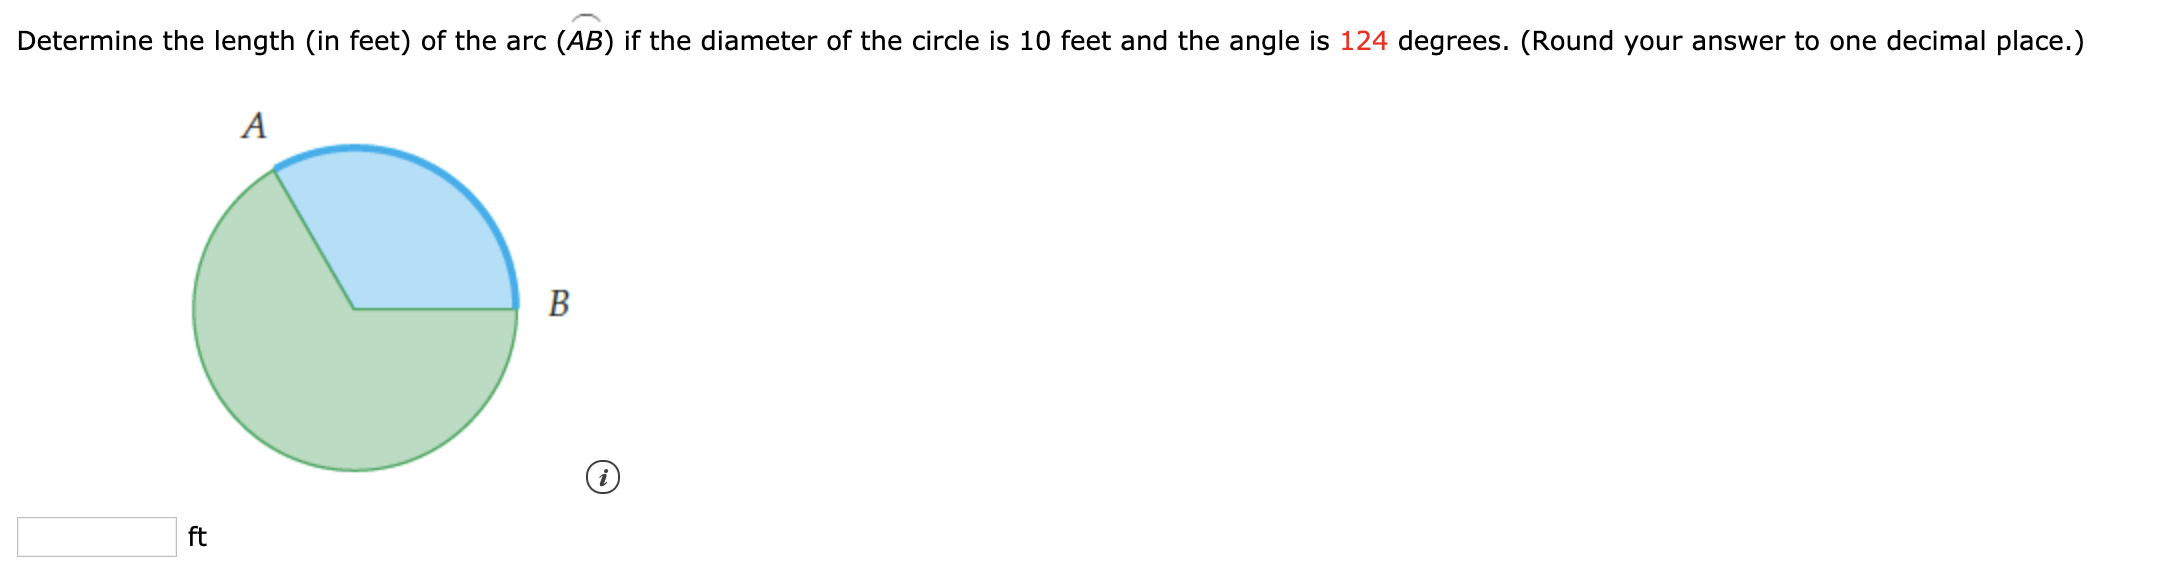 Determine the length (in feet) of the arc (AB) if the diameter of the circle is 10 feet and the angle is 124 degrees. (Round your answer to one decimal place.)
B
ft
